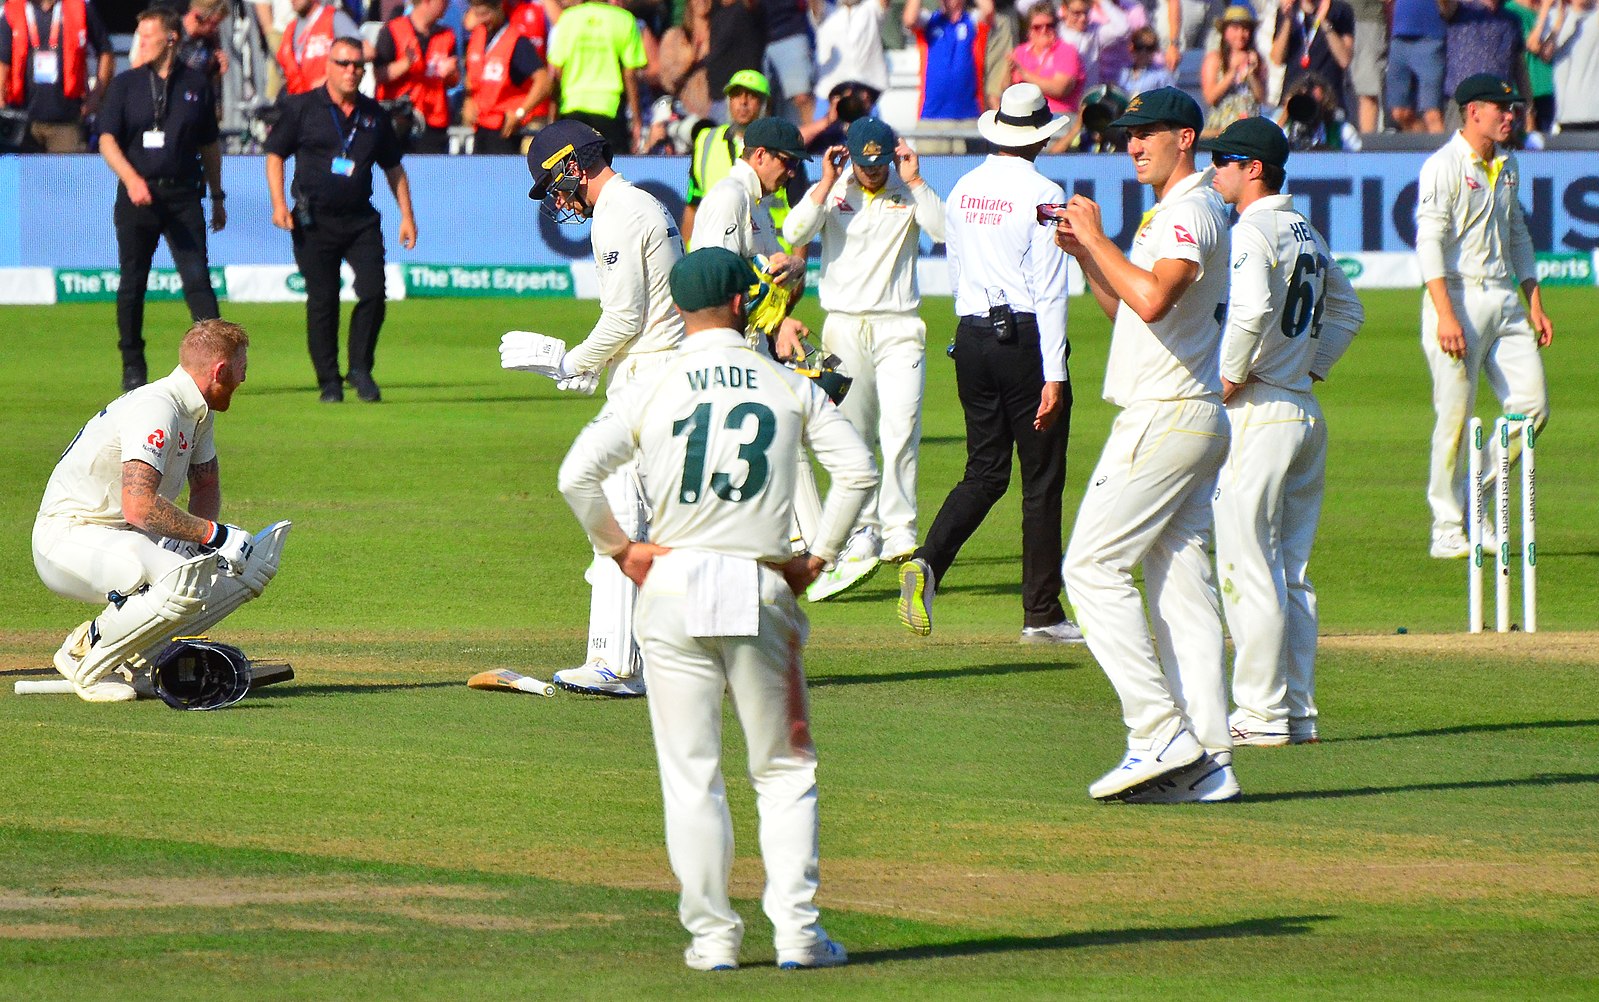 England's Ben Stokes on his haunches, taking in the victory over Australia, on Day 4 of the 3rd Test of the 2019 Ashes at Headingley